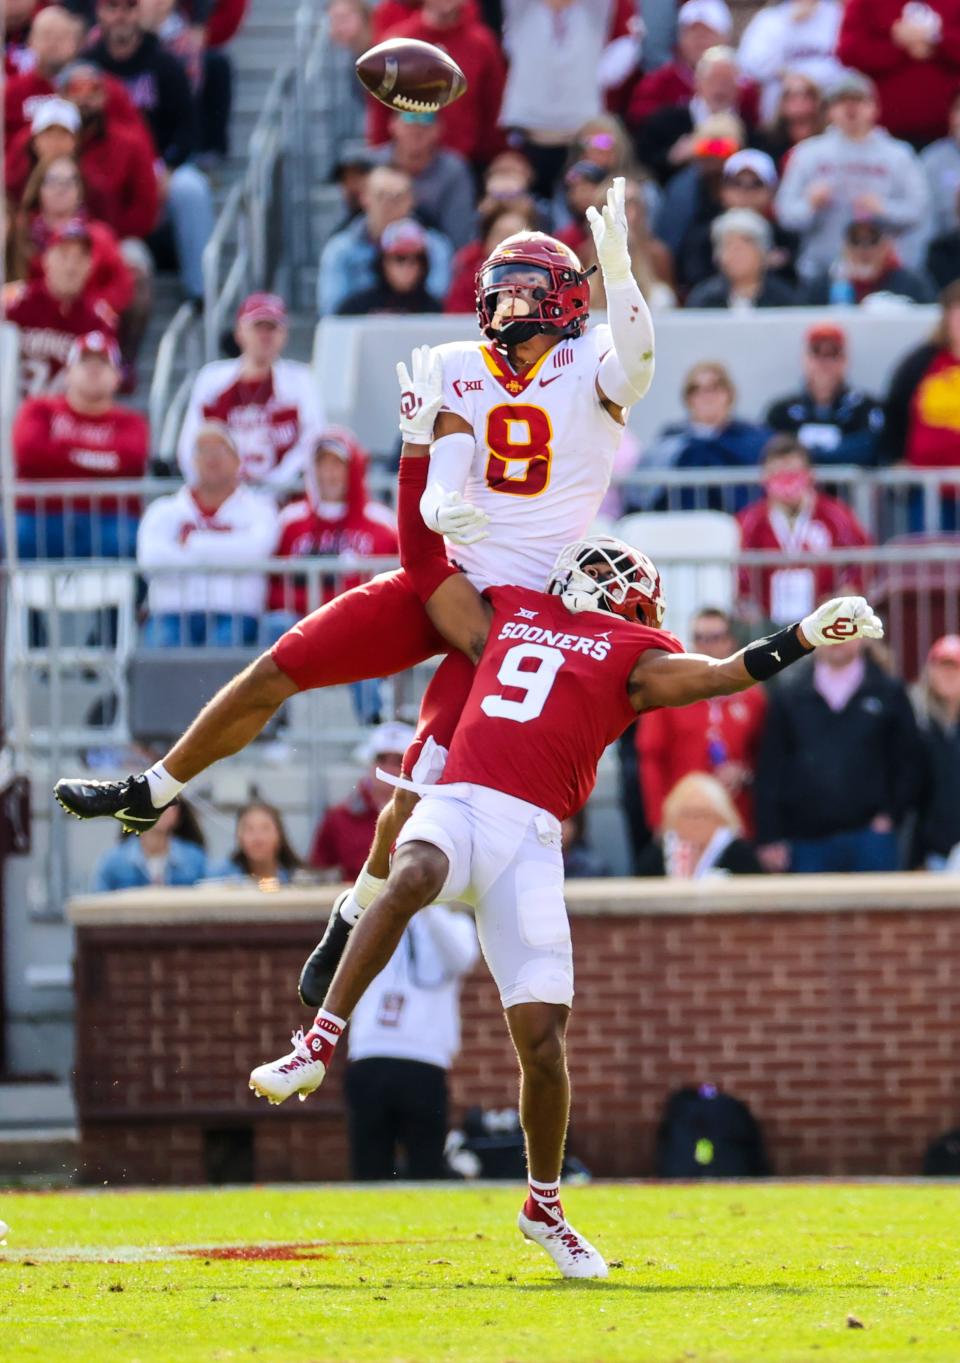 We know Iowa State's Xavier Hutchinson will start at wide receiver. The rest of the depth chart is uncertain, at least at the backup positions.